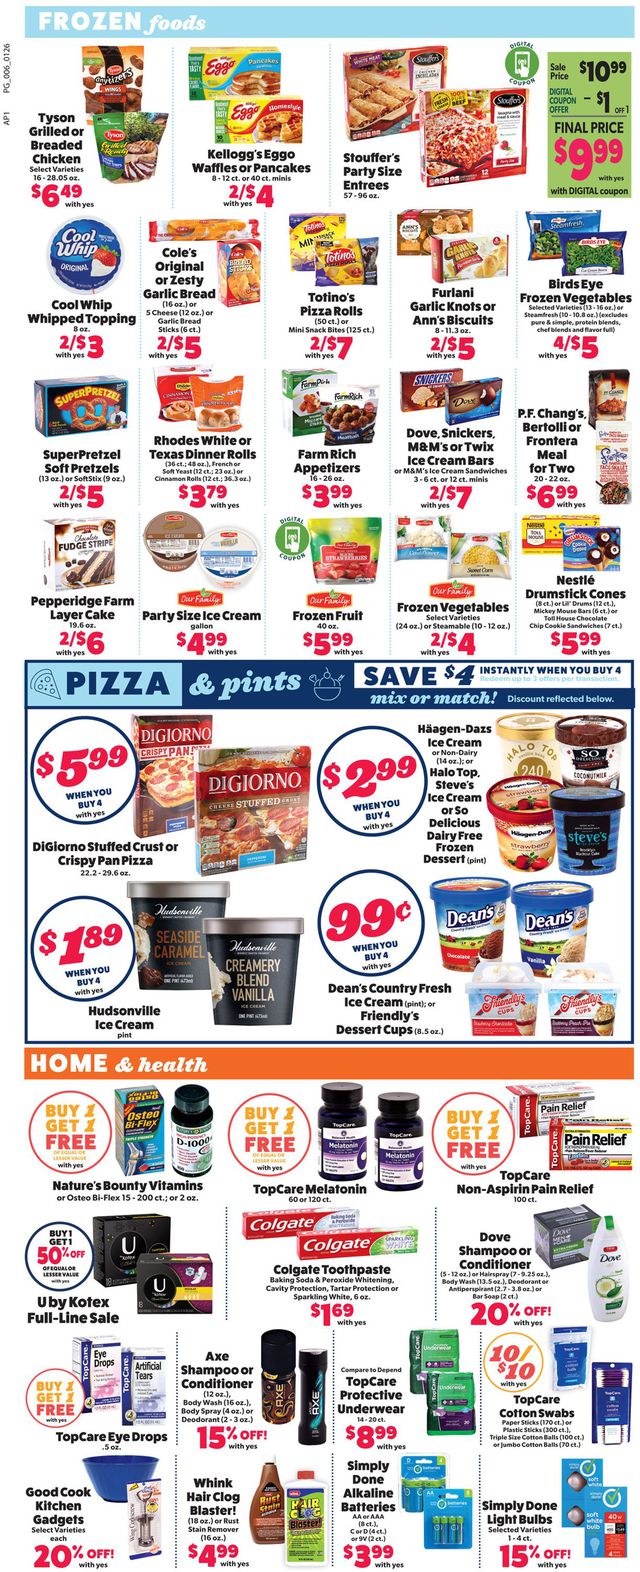 Family Fare Ad from 01/26/2020